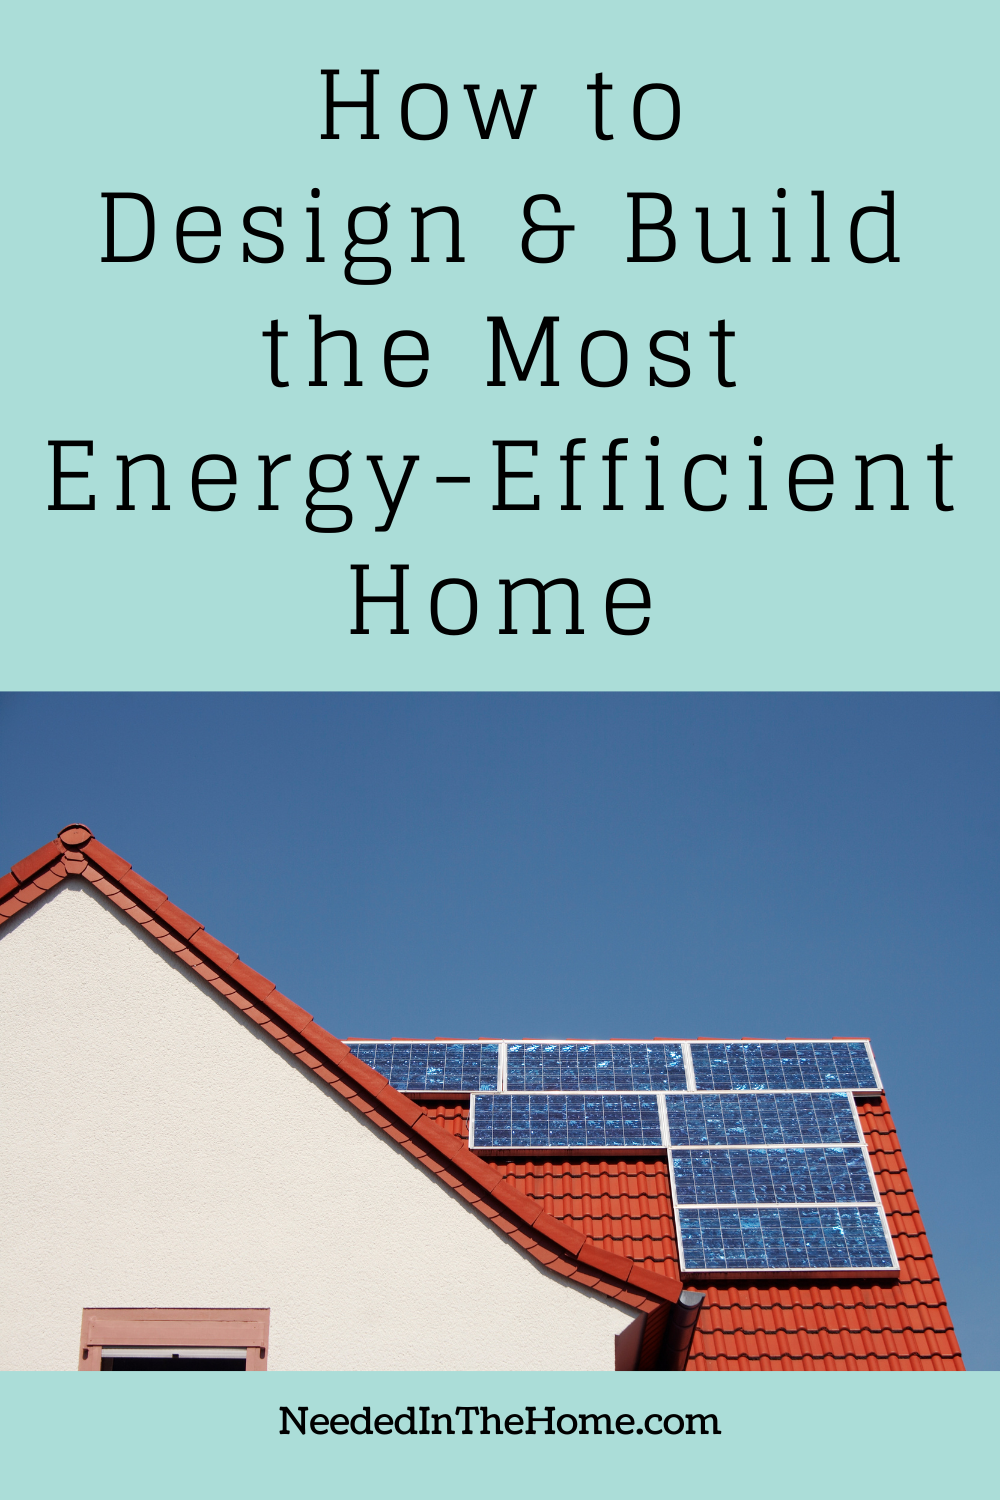 pinterest pin description how to design and build the most energy efficient home solar panels on rust colored roof in new build neededinthehome